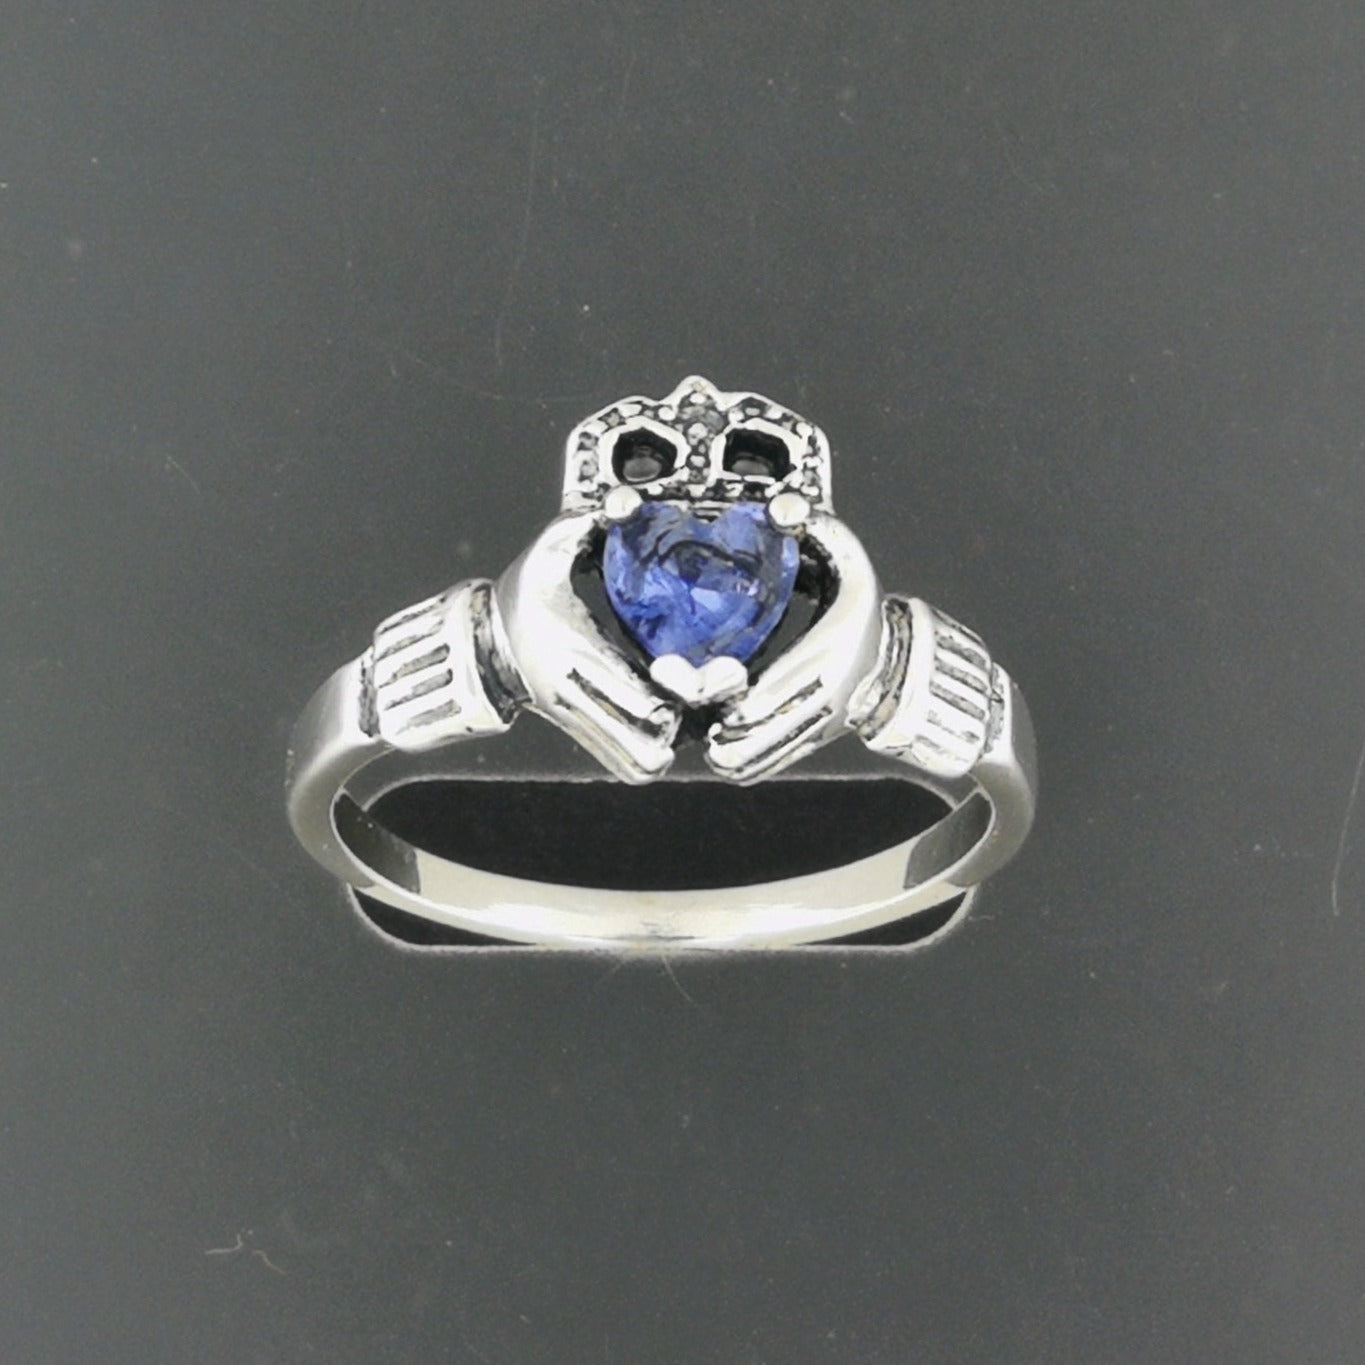 Sterling Silver Claddagh Ring with Iolite Heart, 925 Sterling Silver Claddagh Ring with Gemstone Heart, Irish Celtic Claddagh Ring with Gemstone, Ladies Celtic Claddagh Ring with Gemstone, Birthstone Claddagh Ring